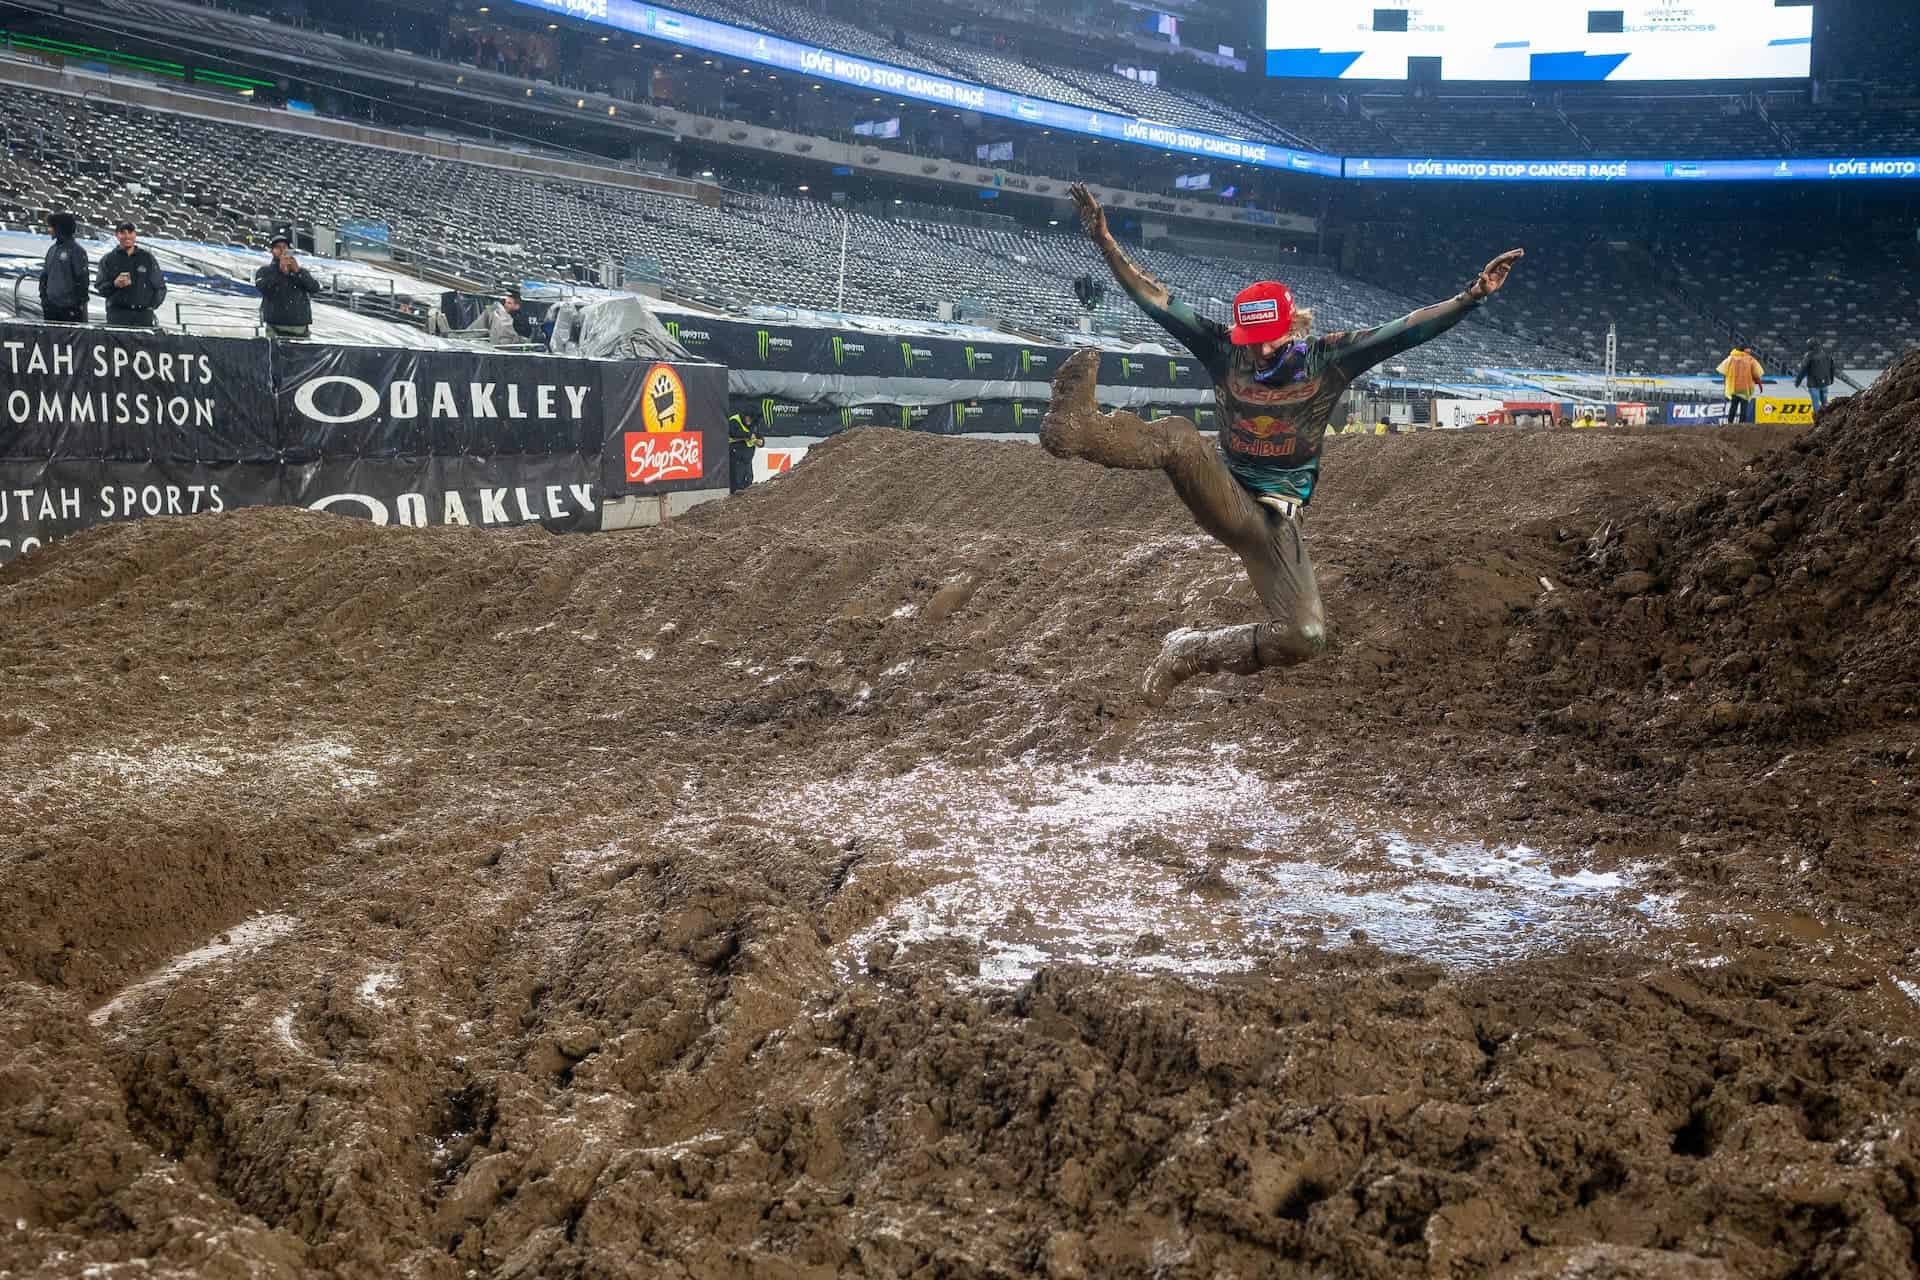 Justin Barcia was brilliant in the mud and earned his first win of the 2023 season. Photo Credit: Feld Motor Sports, Inc.